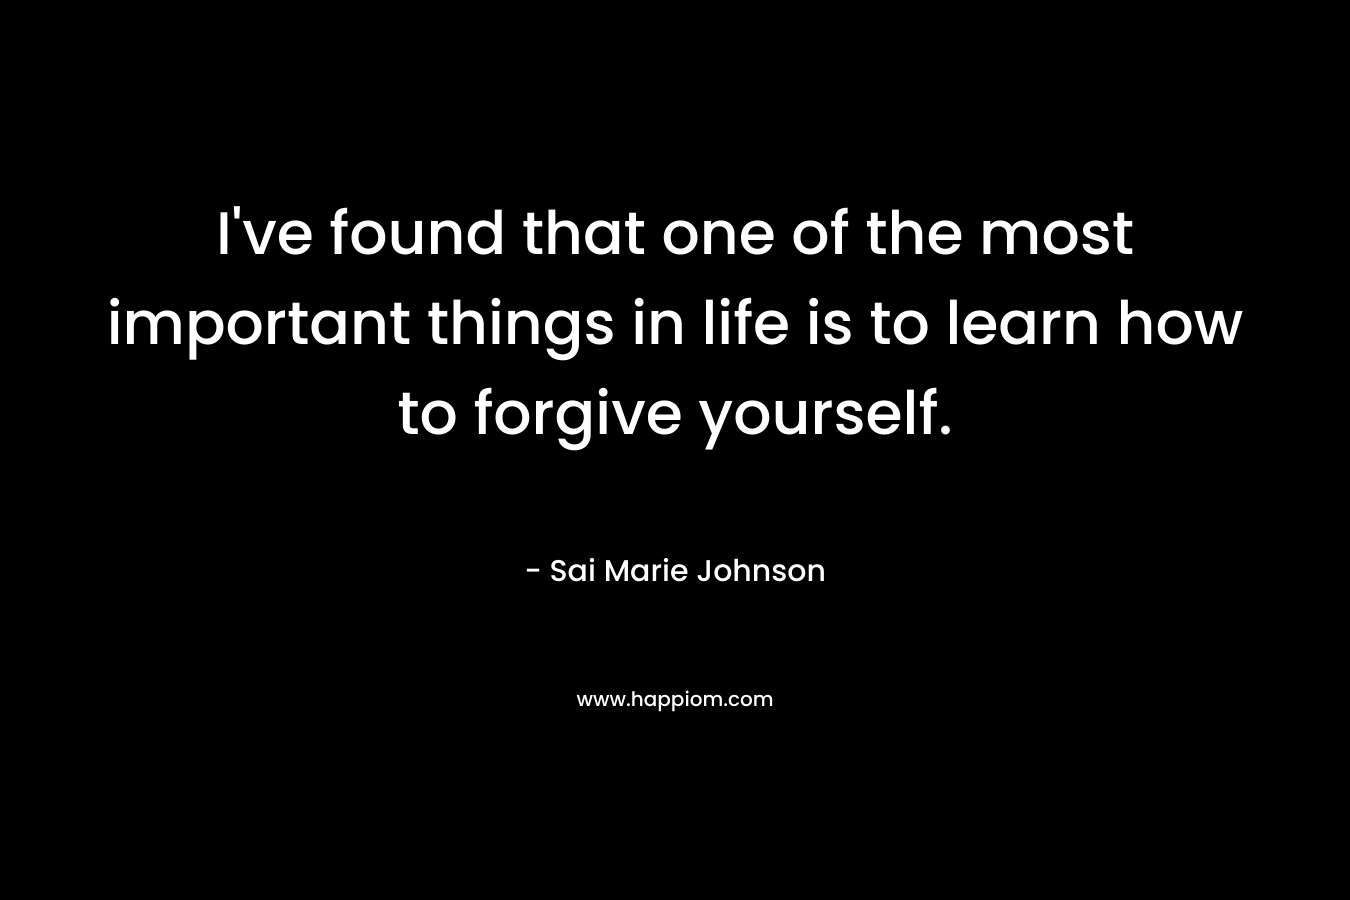 I've found that one of the most important things in life is to learn how to forgive yourself.